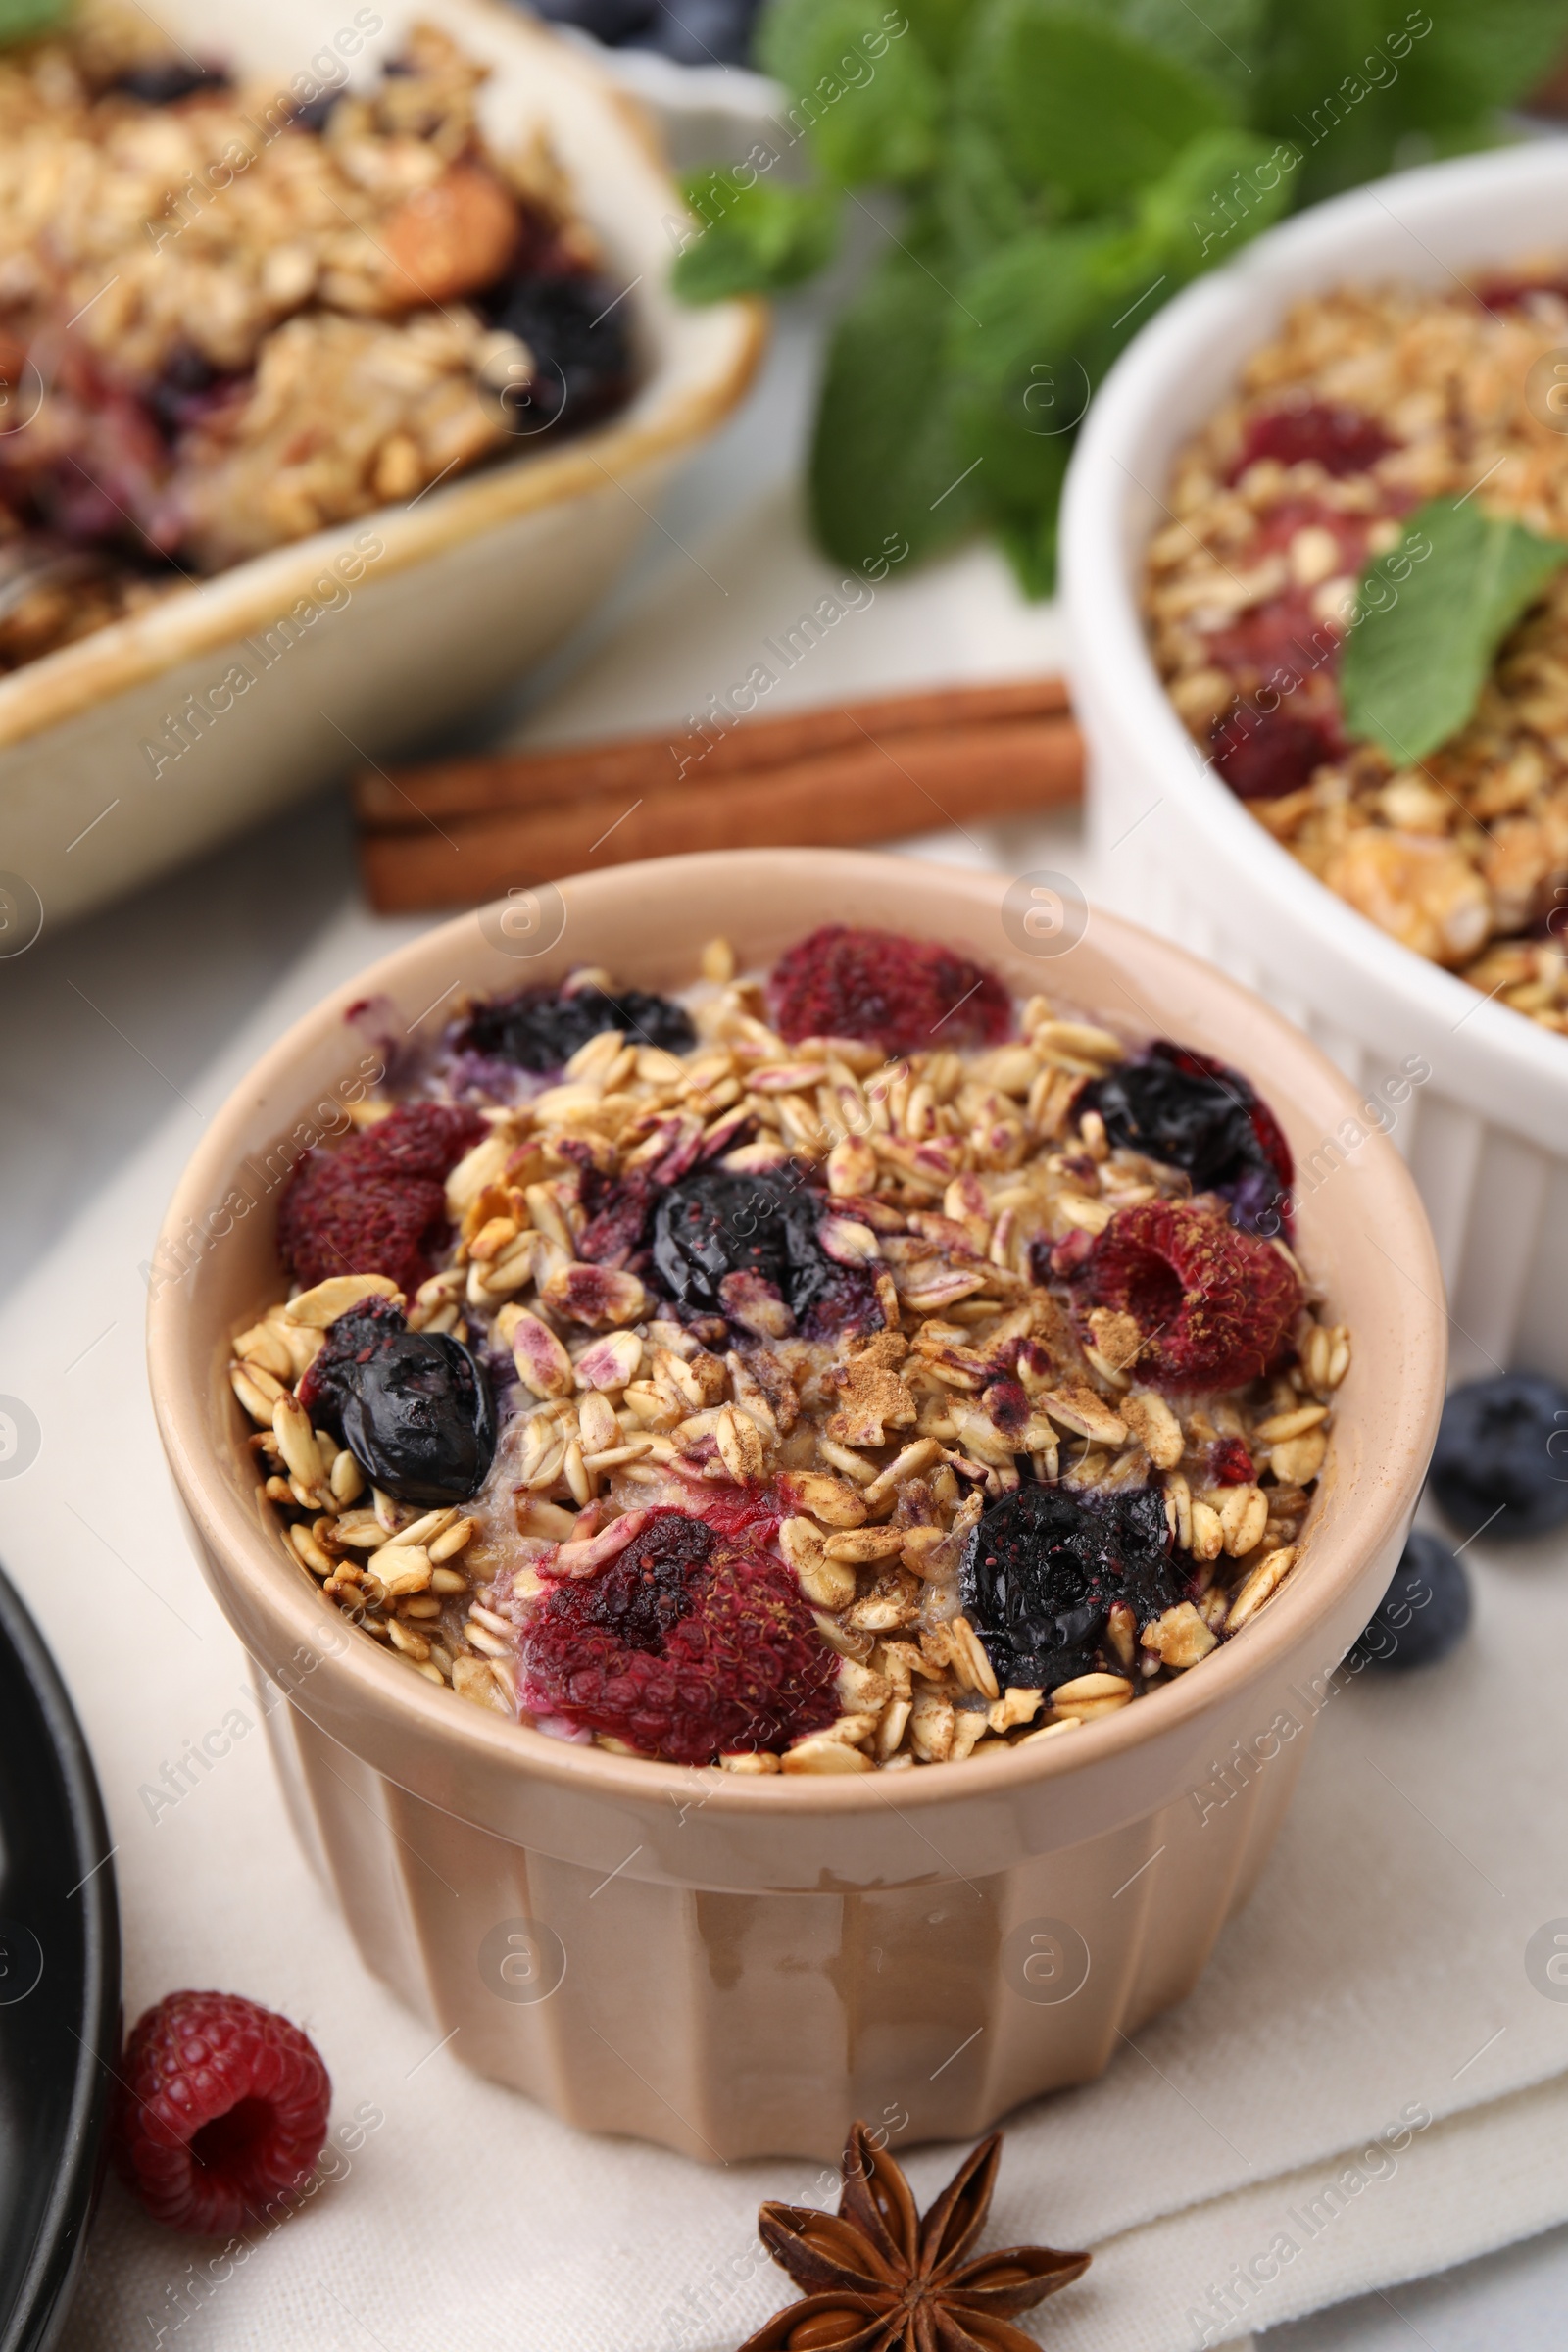 Photo of Tasty baked oatmeal with berries and anise star on table